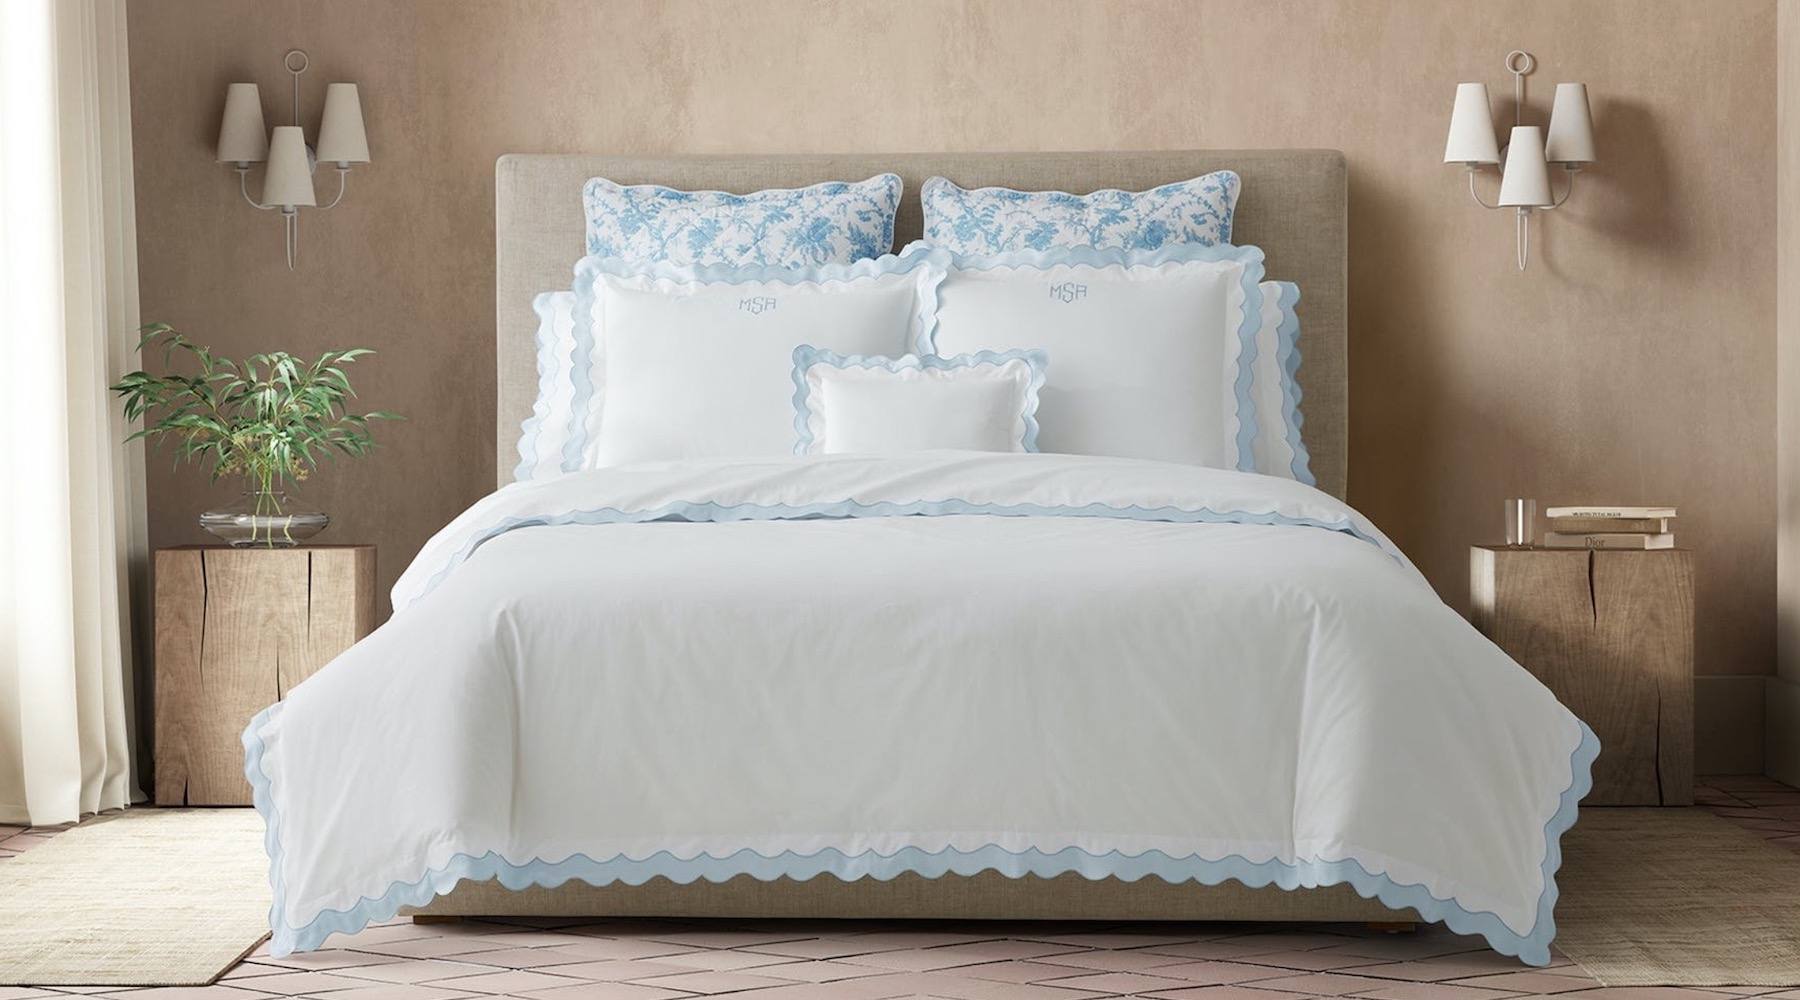 Shop the Matouk Boutique at Fig Linens and Home. Explore the world of Matouk Sheets, Matouk Towels, Matouk Schumacher, Matouk Table Linens and Matouk Down Comforters. The Matouk Quality and exquisite craftsmanship in their Fine Linens is unsurpassed..